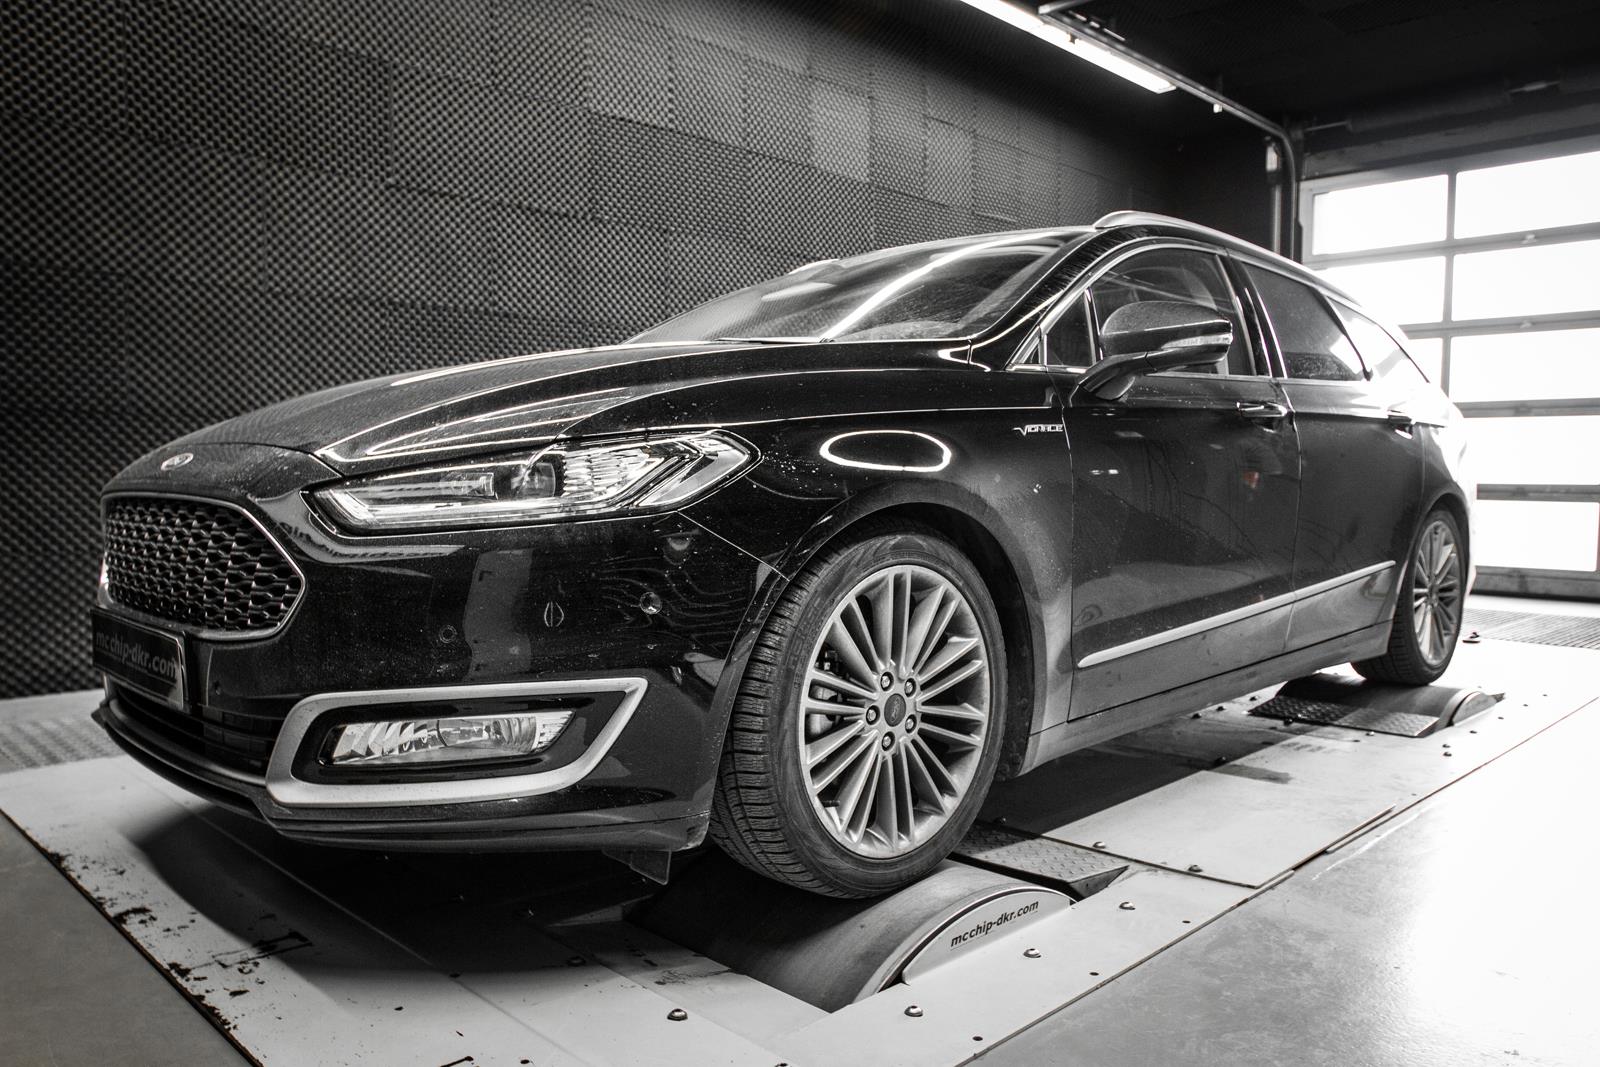 Wissen Krimpen Fjord Ford Mondeo 2.0 Bi-Turbo Diesel Tuned to 235 HP by Mcchip - autoevolution